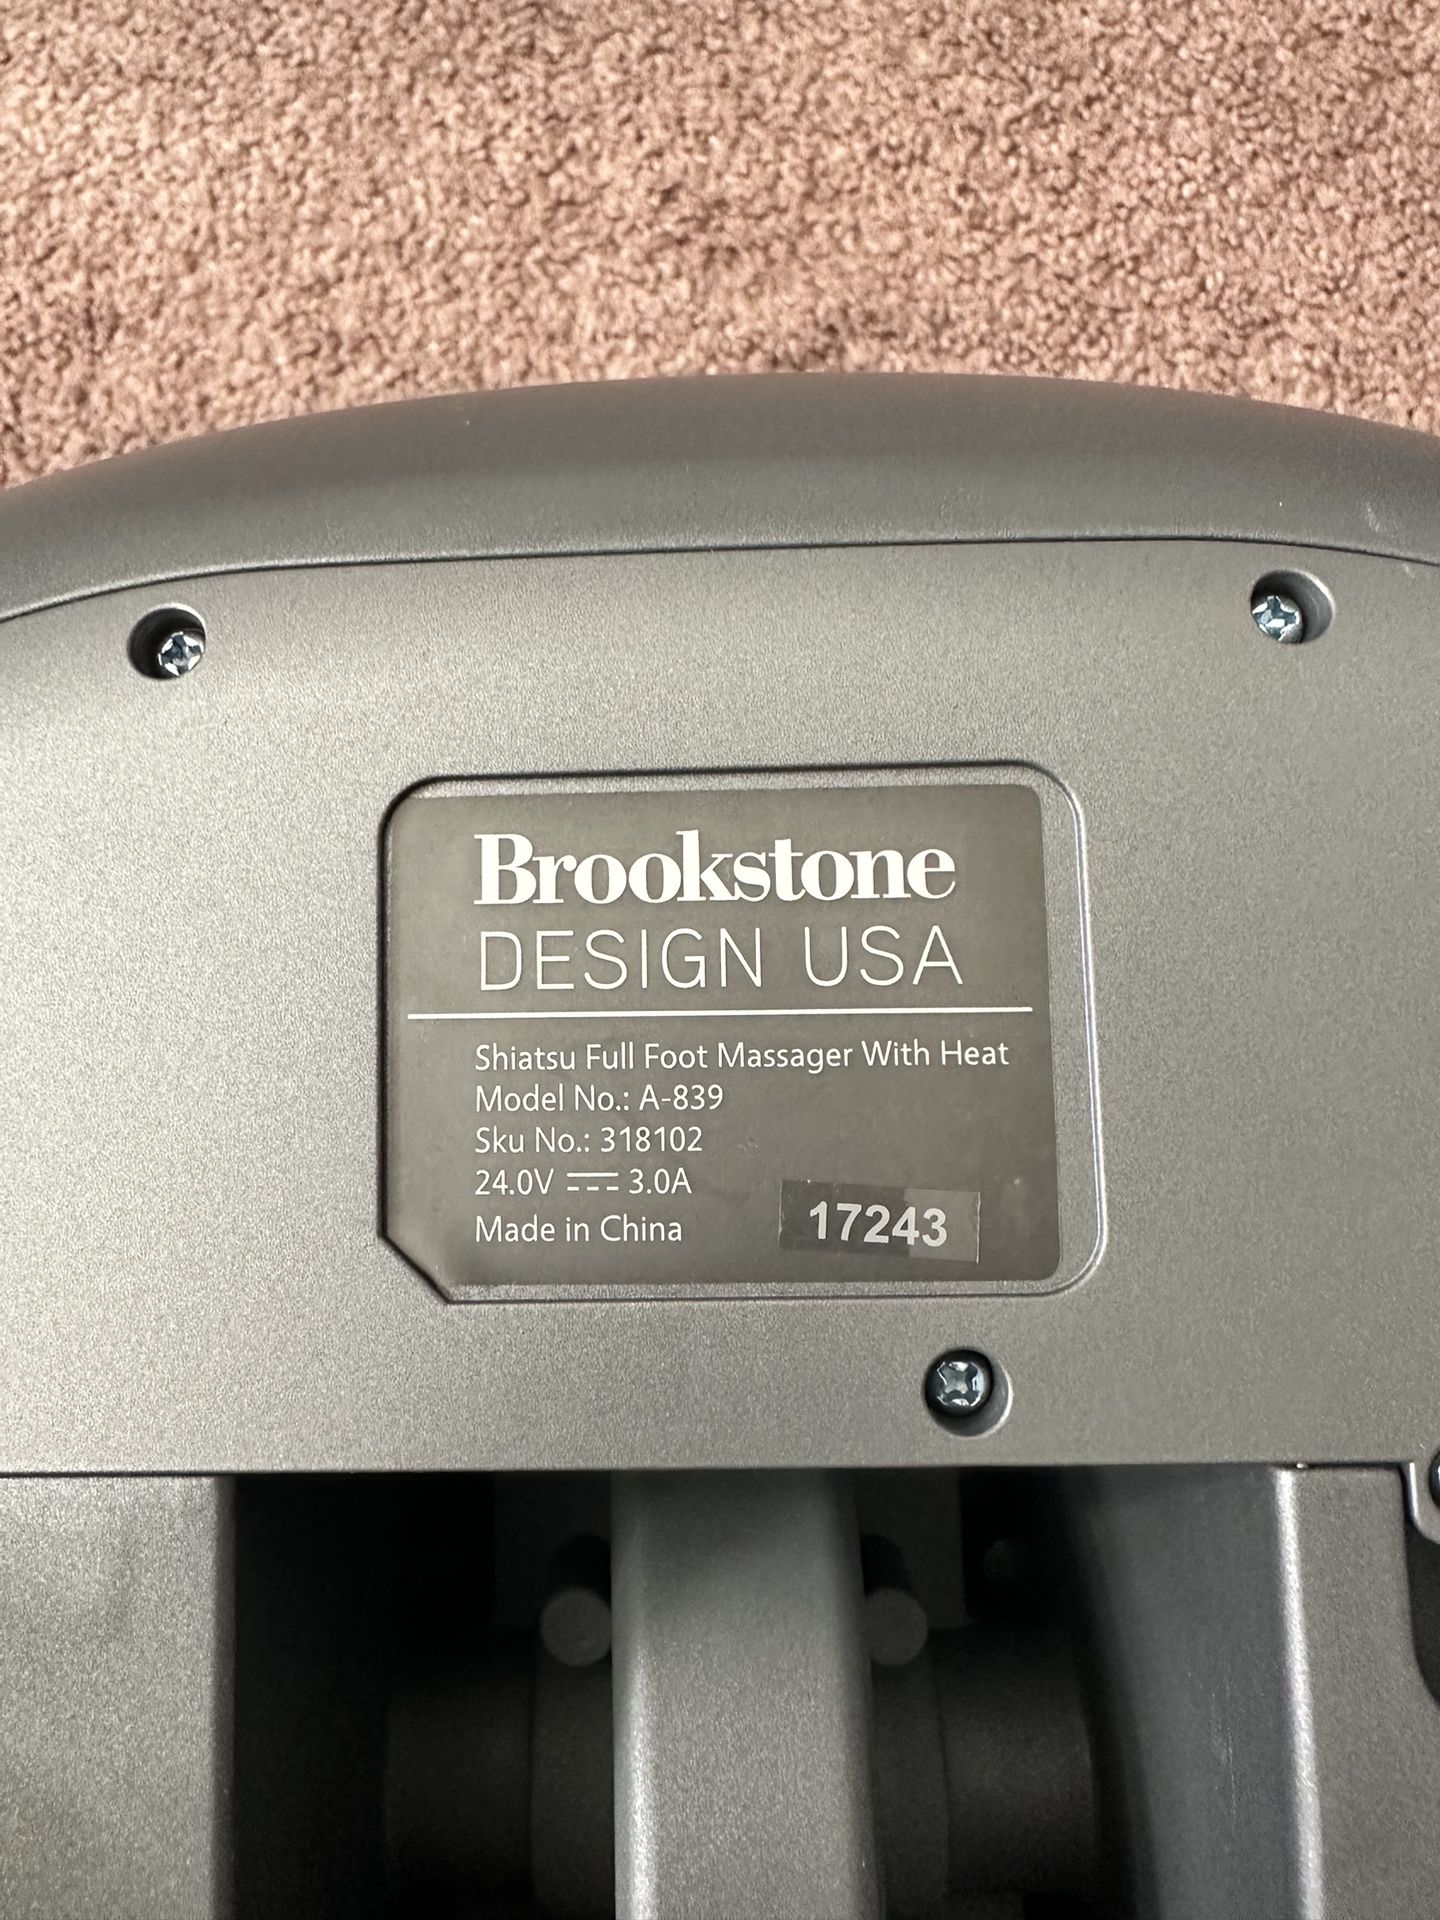 Brookstone Cordless Shiatsu Neck & Back Massager with Heat for Sale in  Pasadena, CA - OfferUp